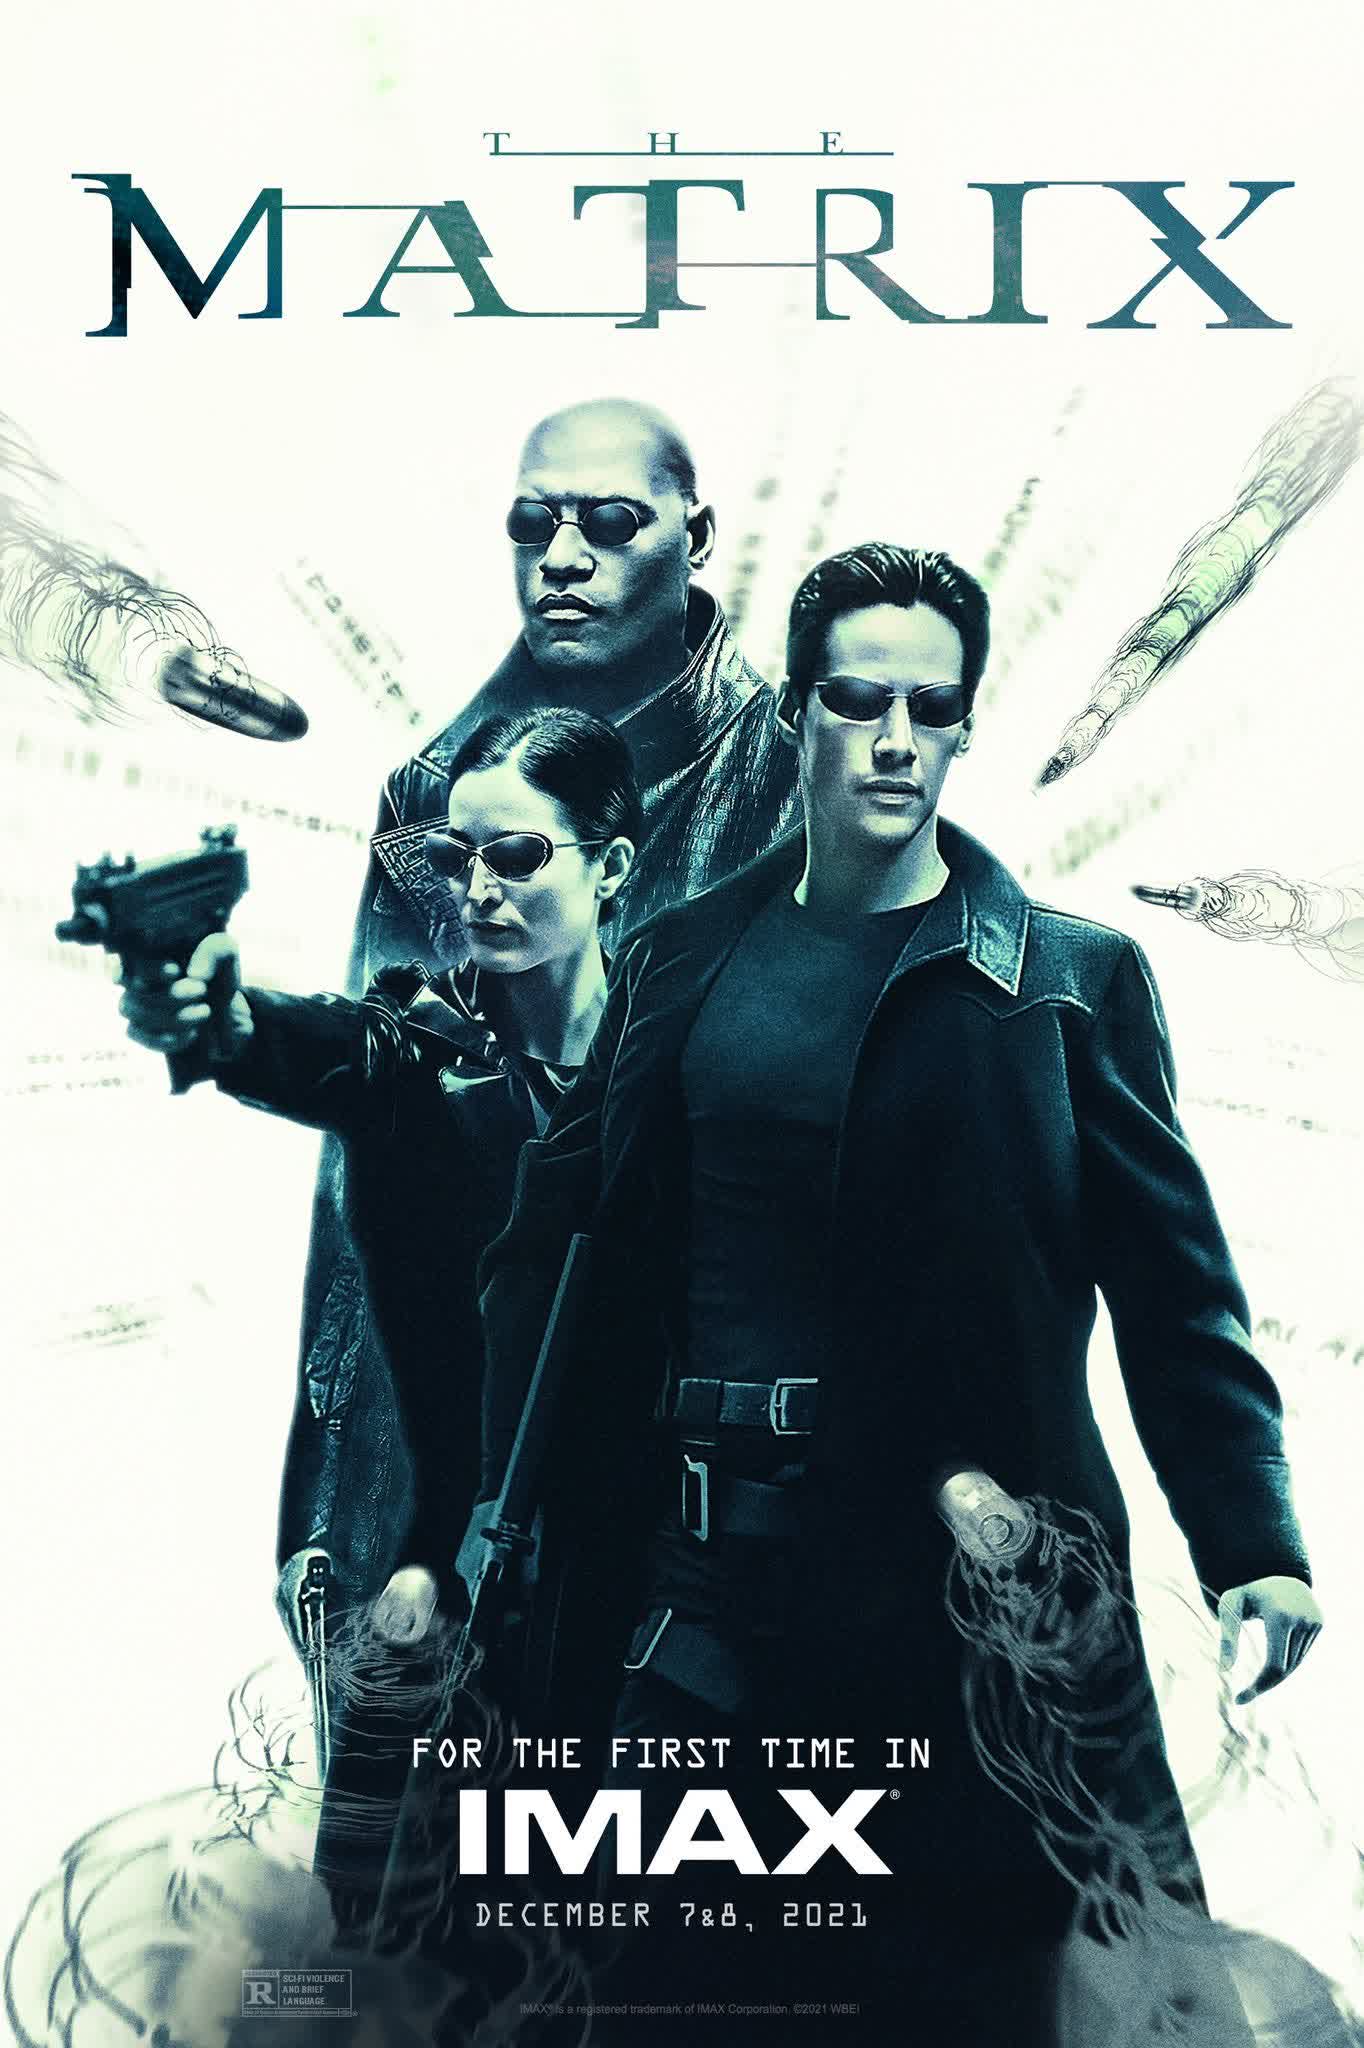 The Matrix is coming to IMAX for the first time ever, but only for two days